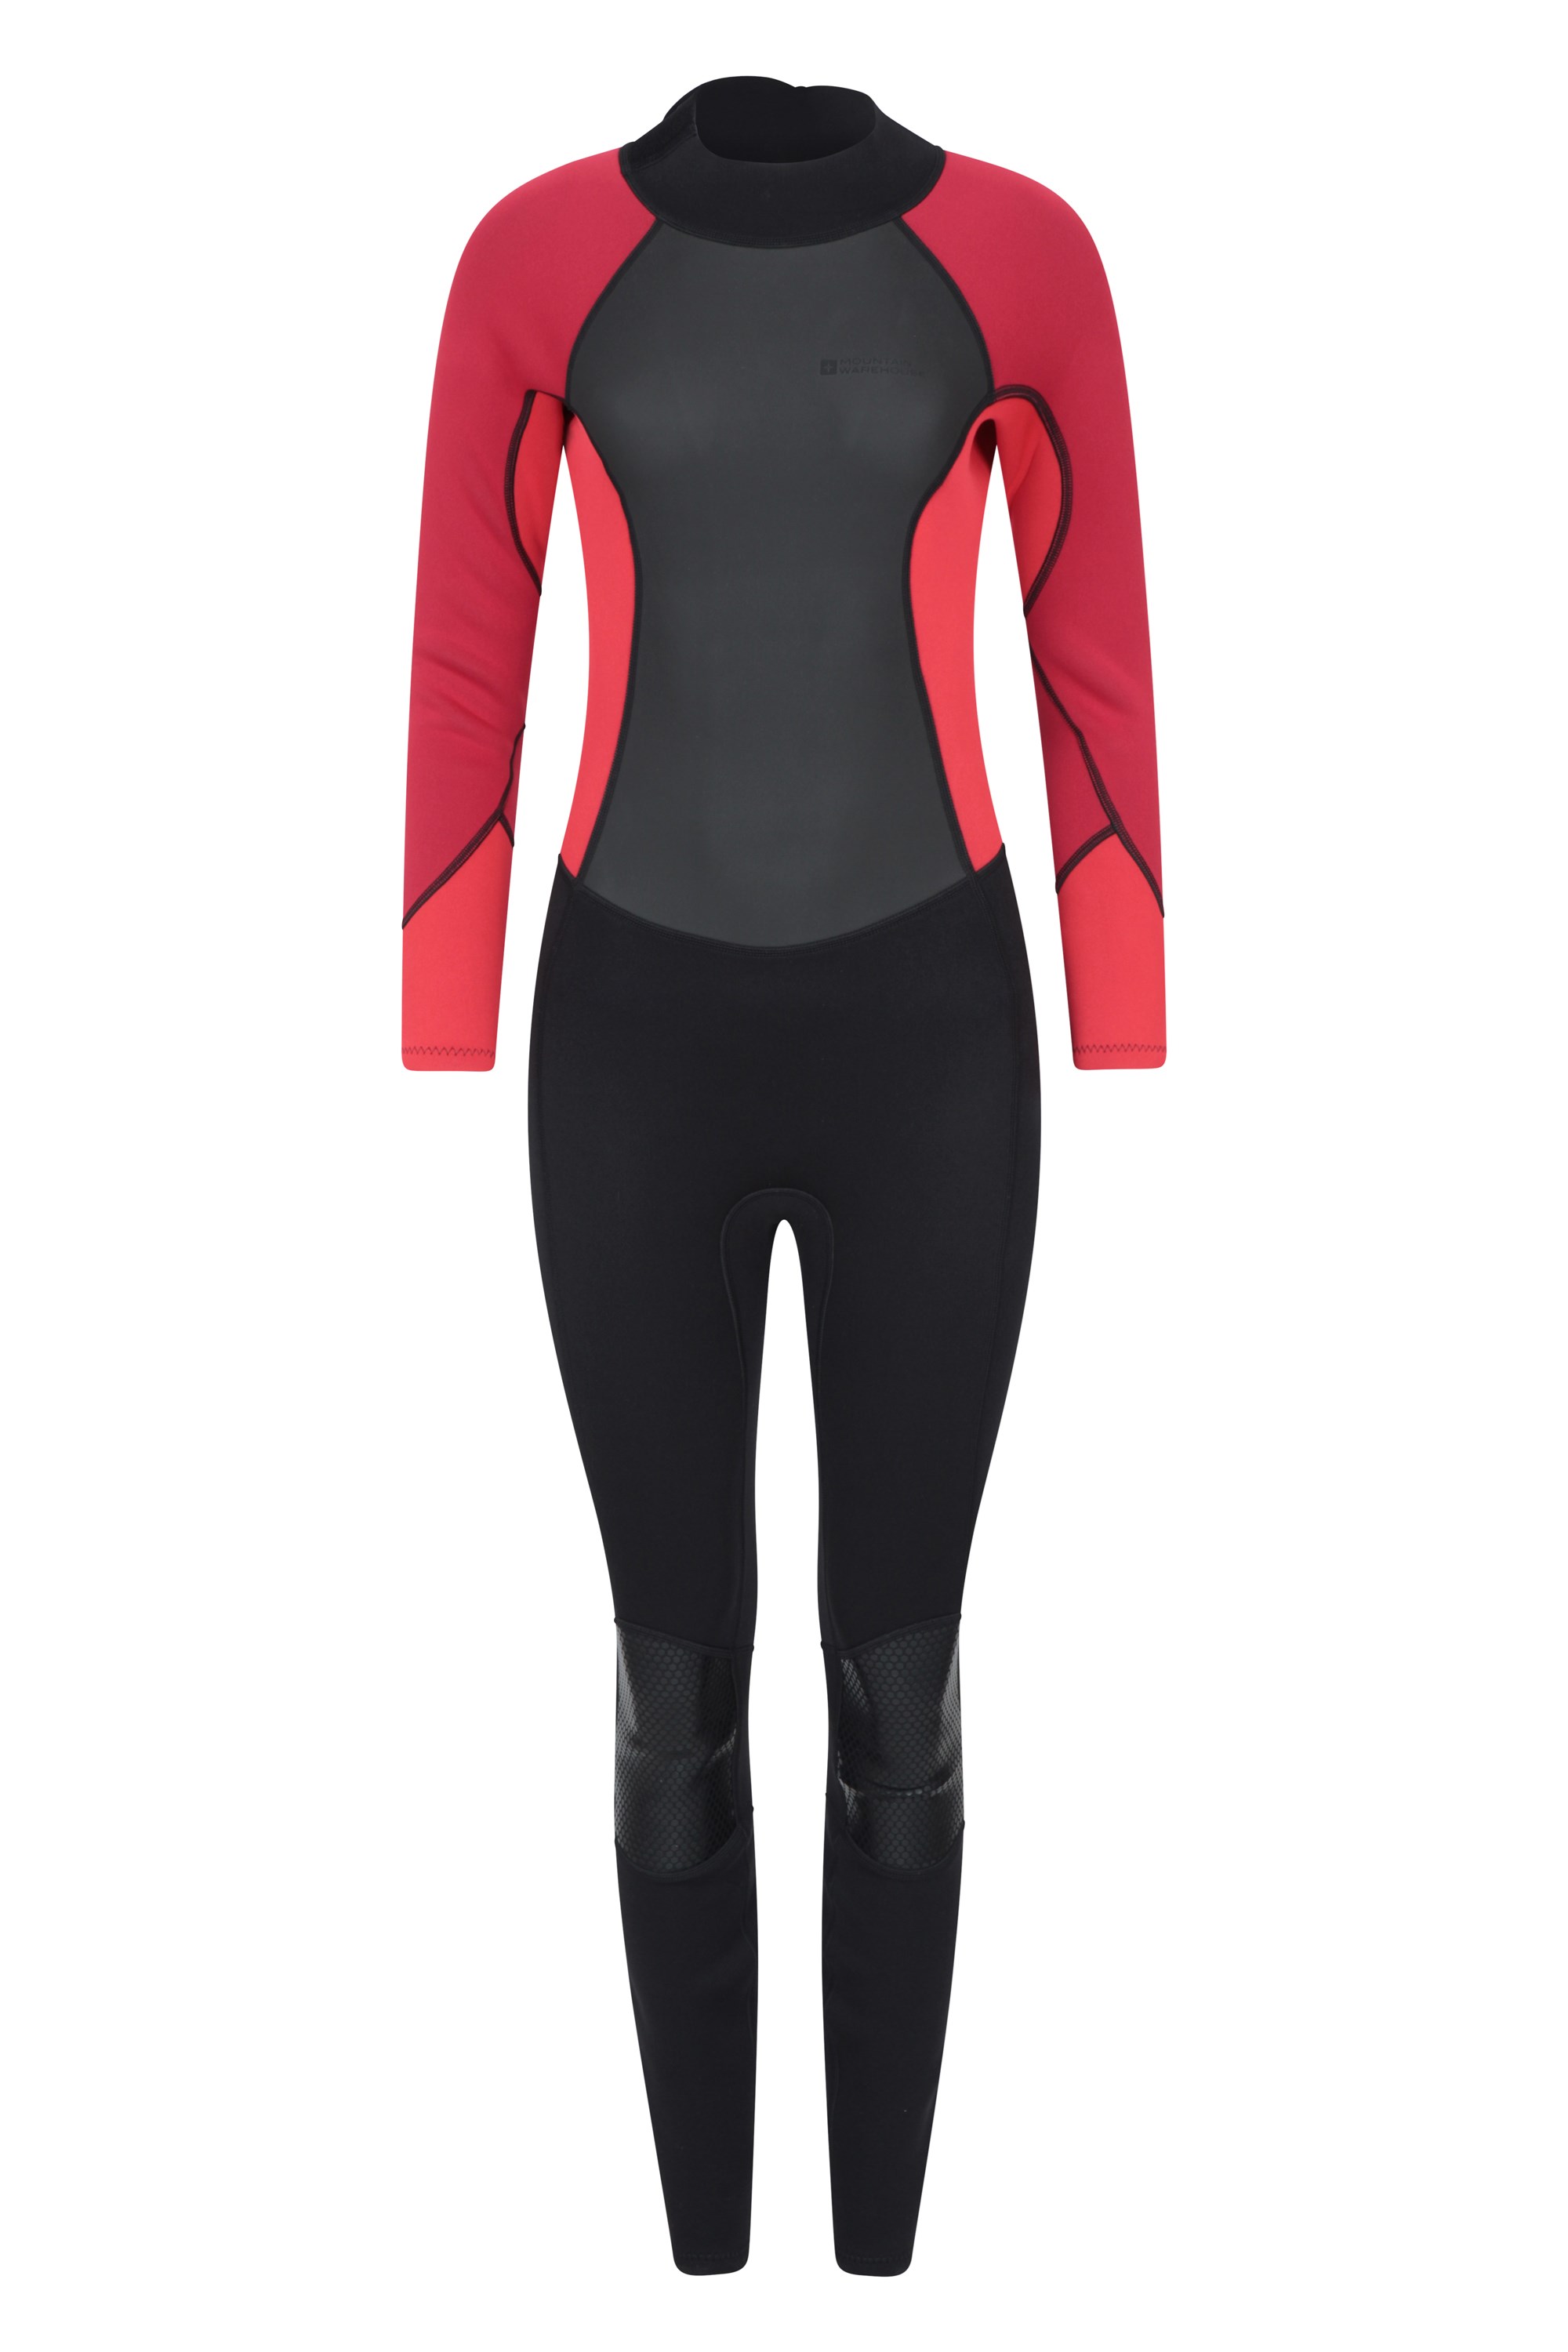 Womens Full Wetsuit - Red